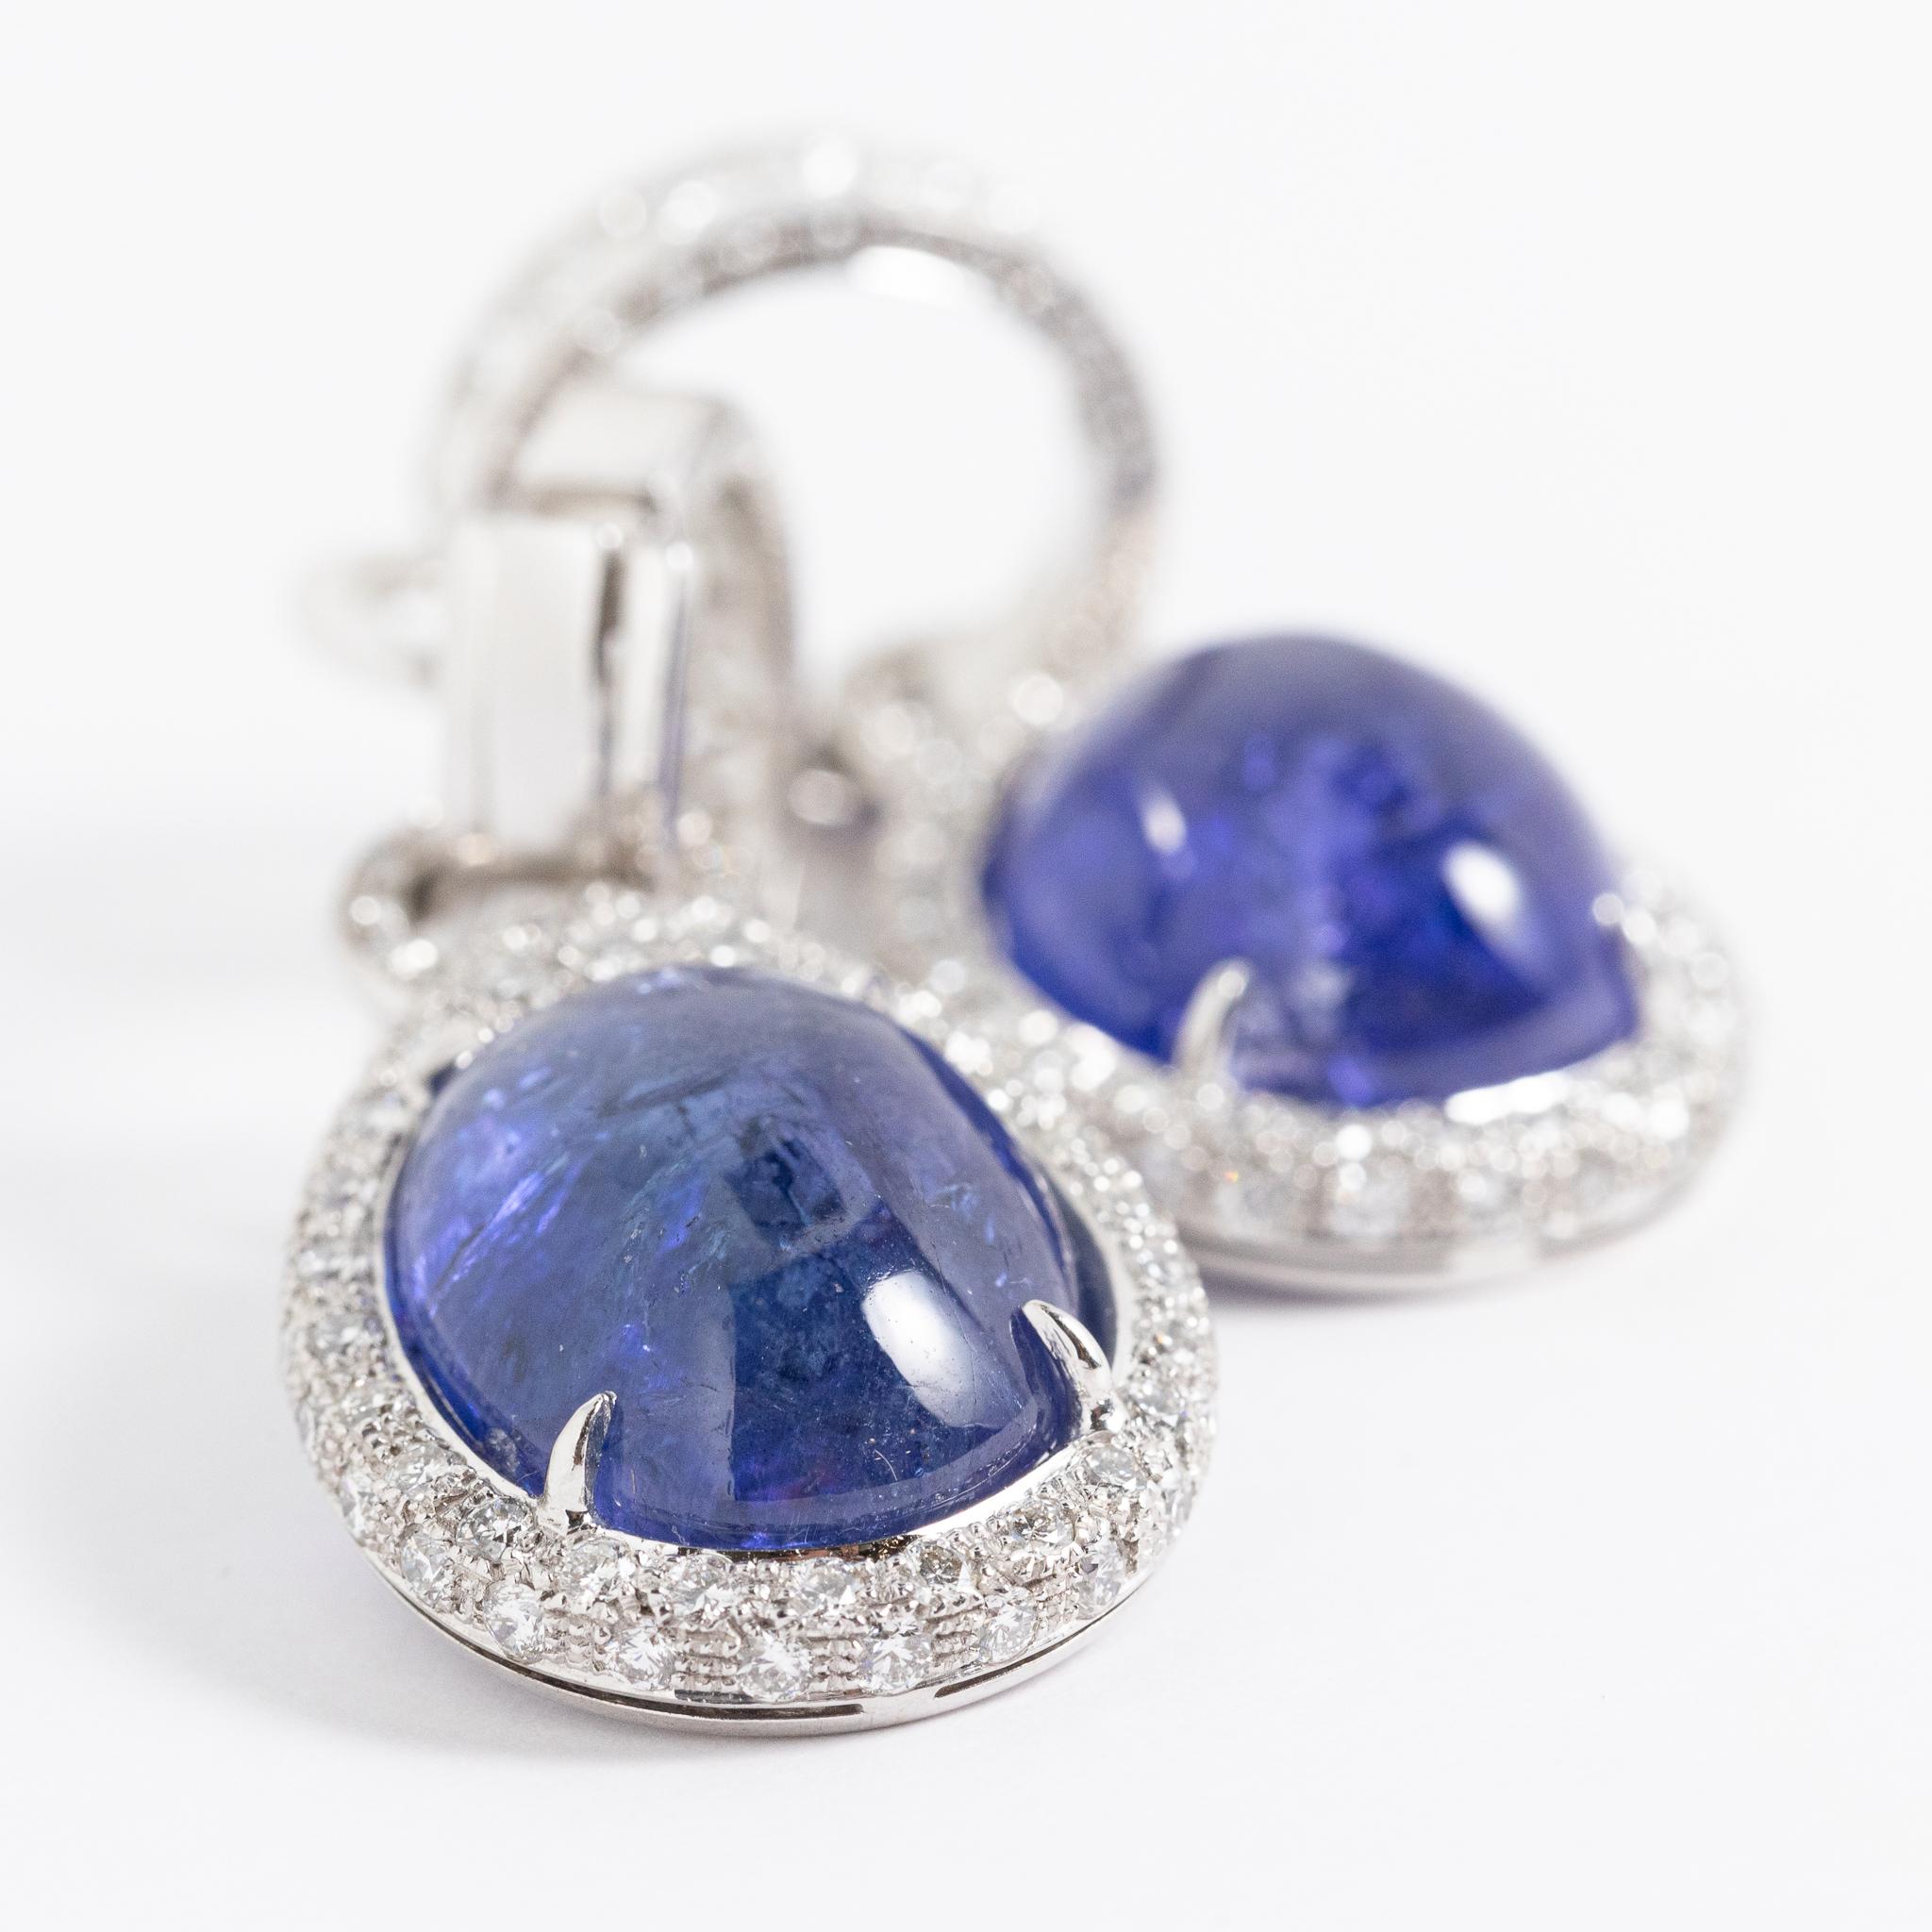 Handmade in Italy 18 kt. white gold earrings with diamonds and tanzanite cabochons.
These ears belong to the Queen Fraleoni Collection and are a unique piece.
The drop of the earrings is removable, and you can also use the hoop without a